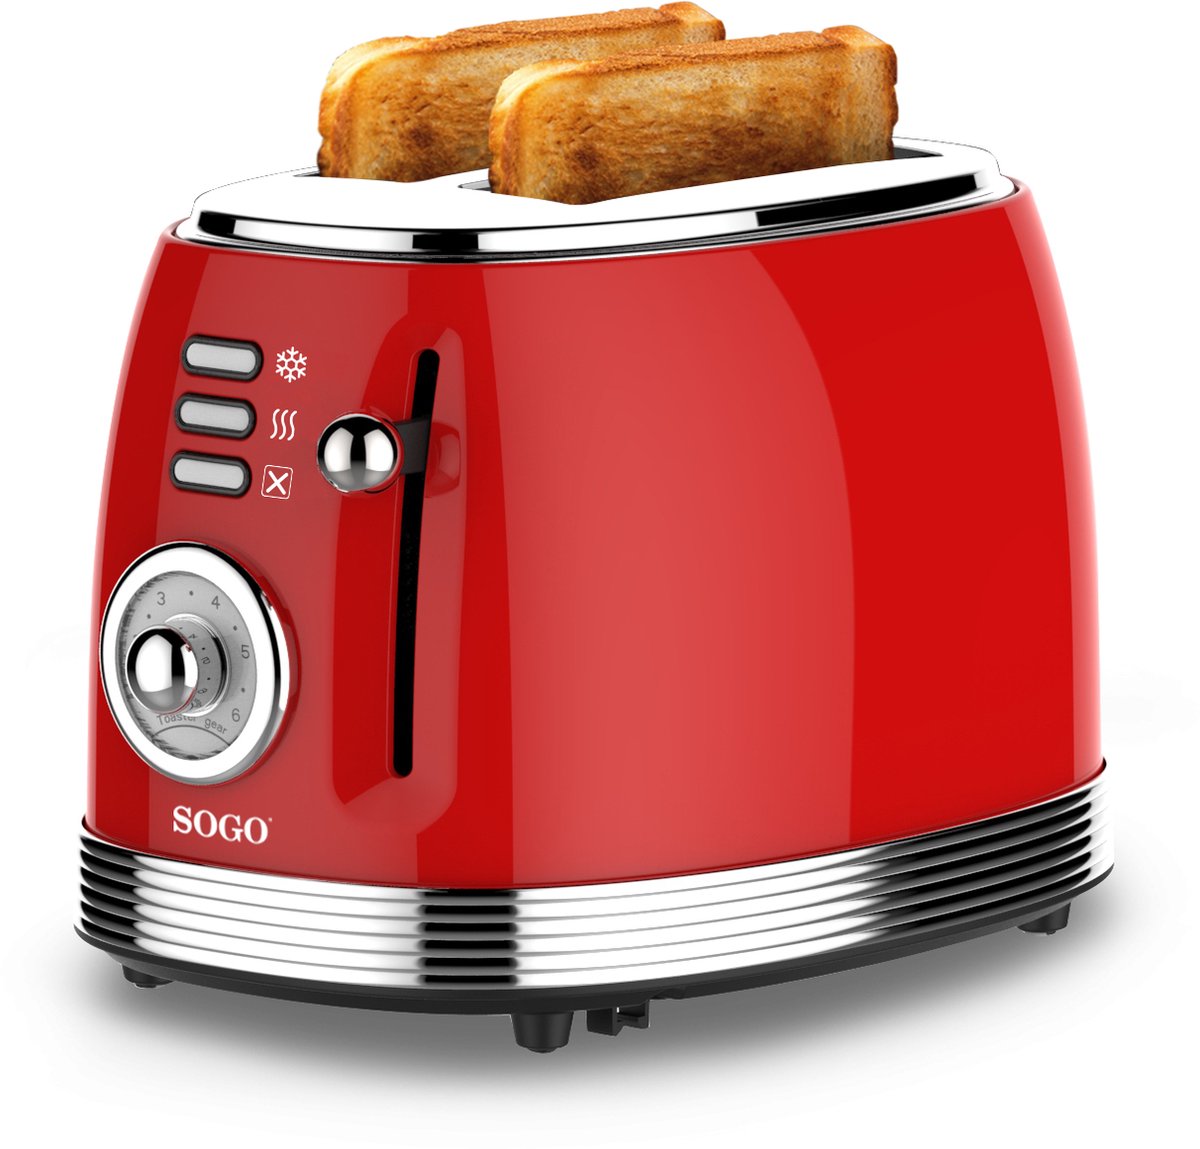 Sogo - 5460 - Retro Brooster - 2 Sleuven - Rood